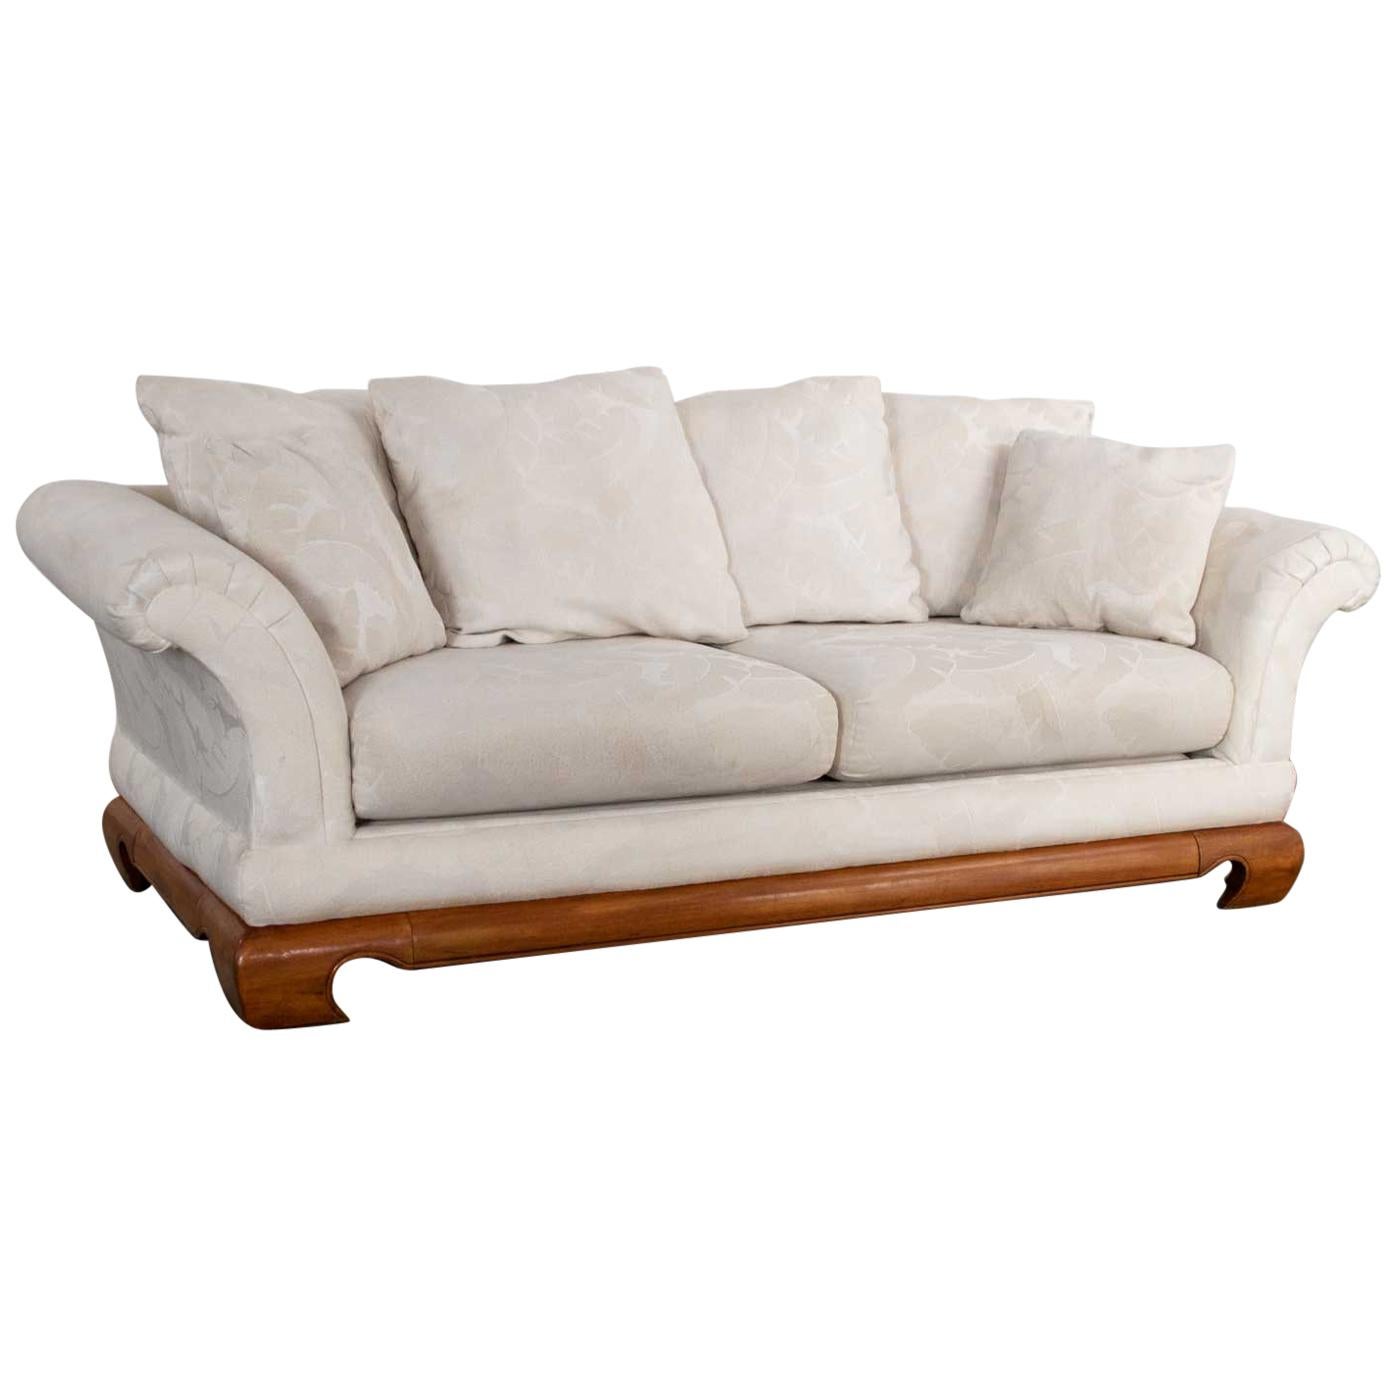 Chinoiserie Chow Leg Ming Style Sofa By Schnadig International Furniture For Sale At 1stdibs